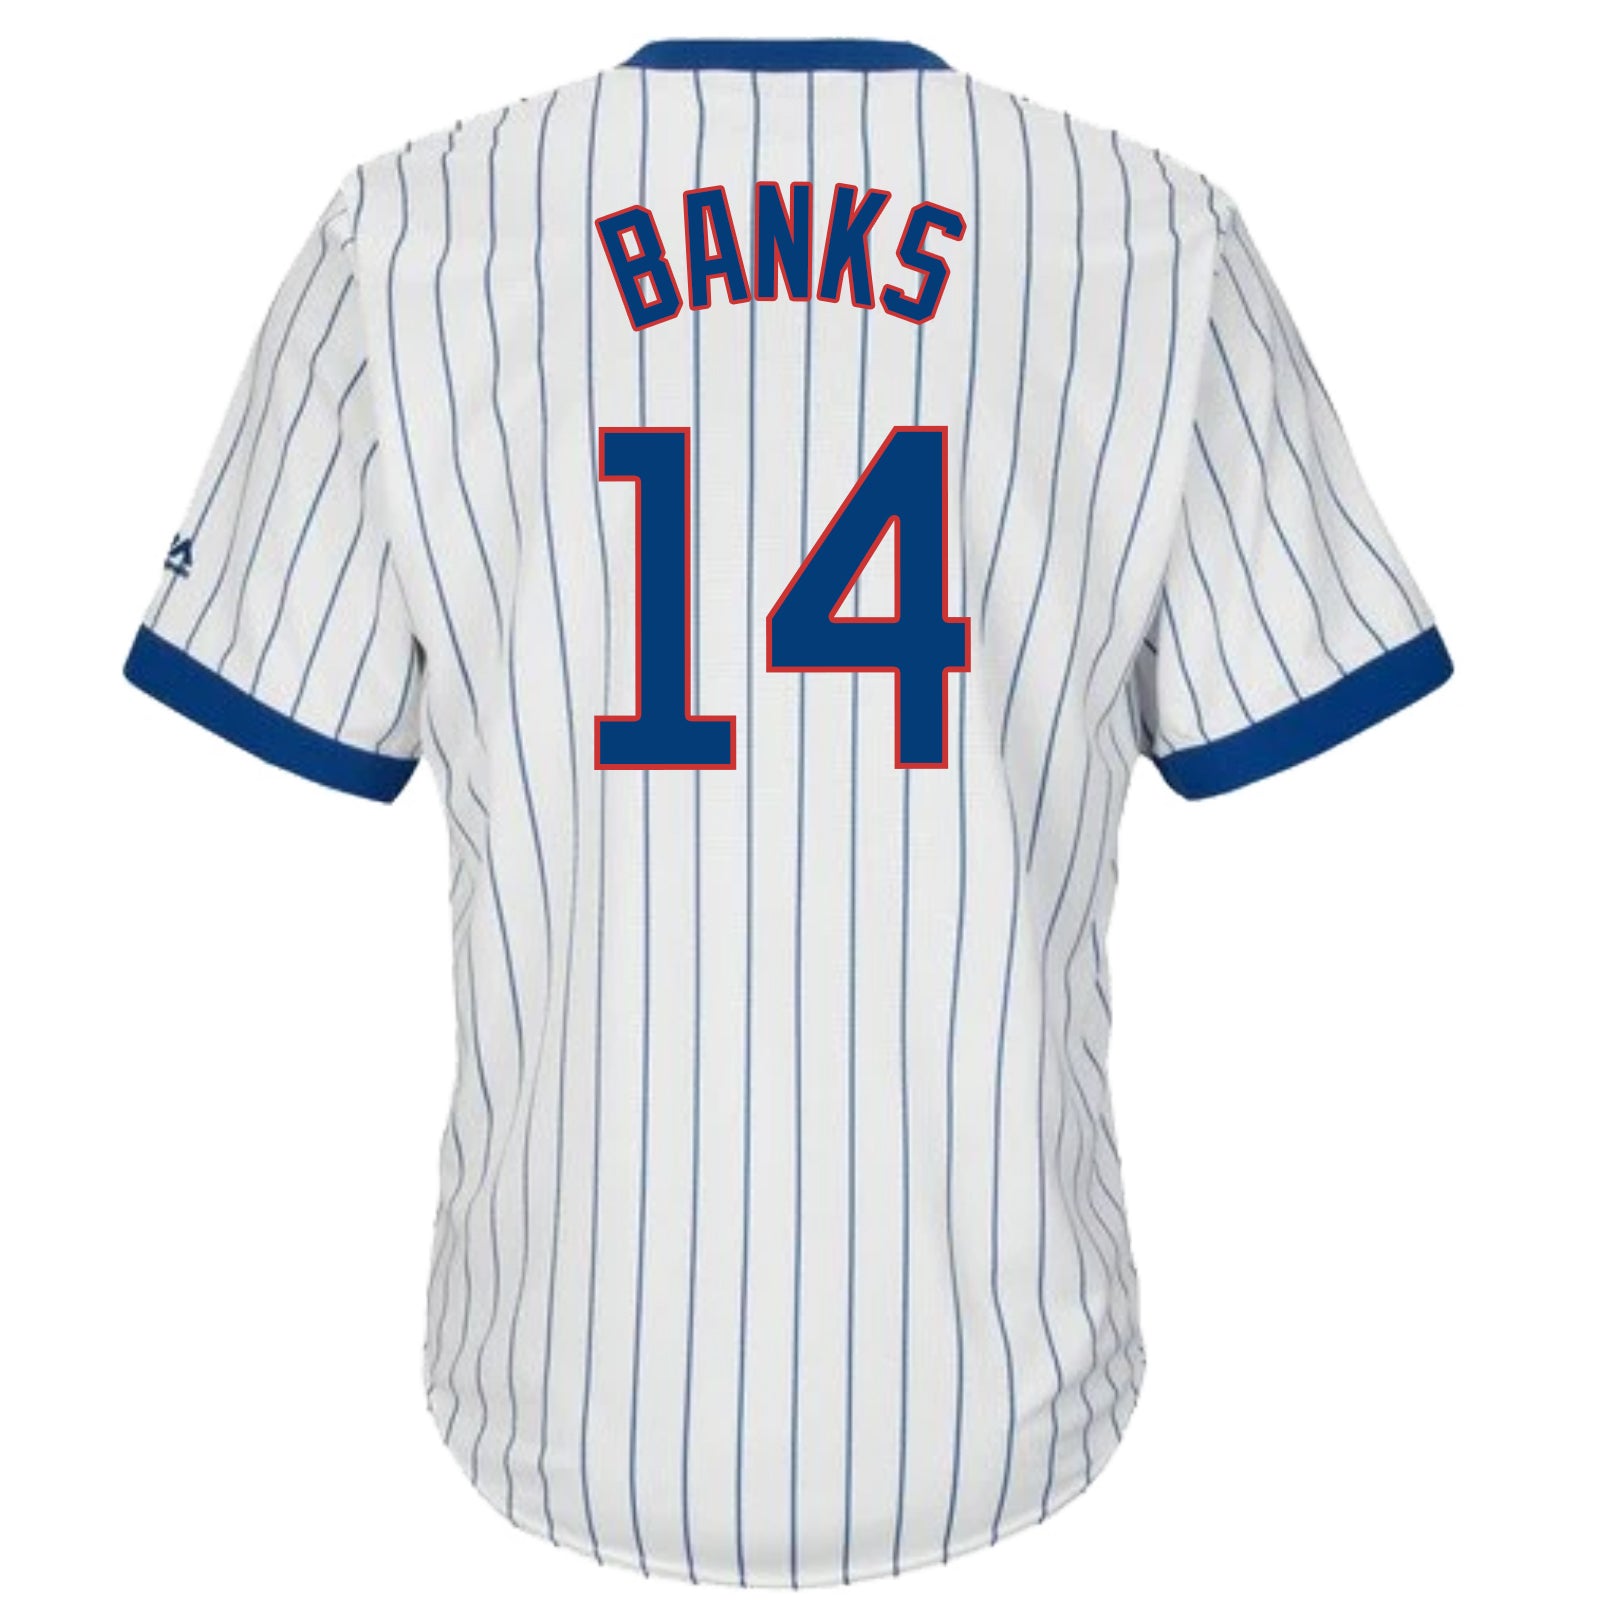 Cubs No8 Andre Dawson Blue Cooperstown Women's Stitched Jersey